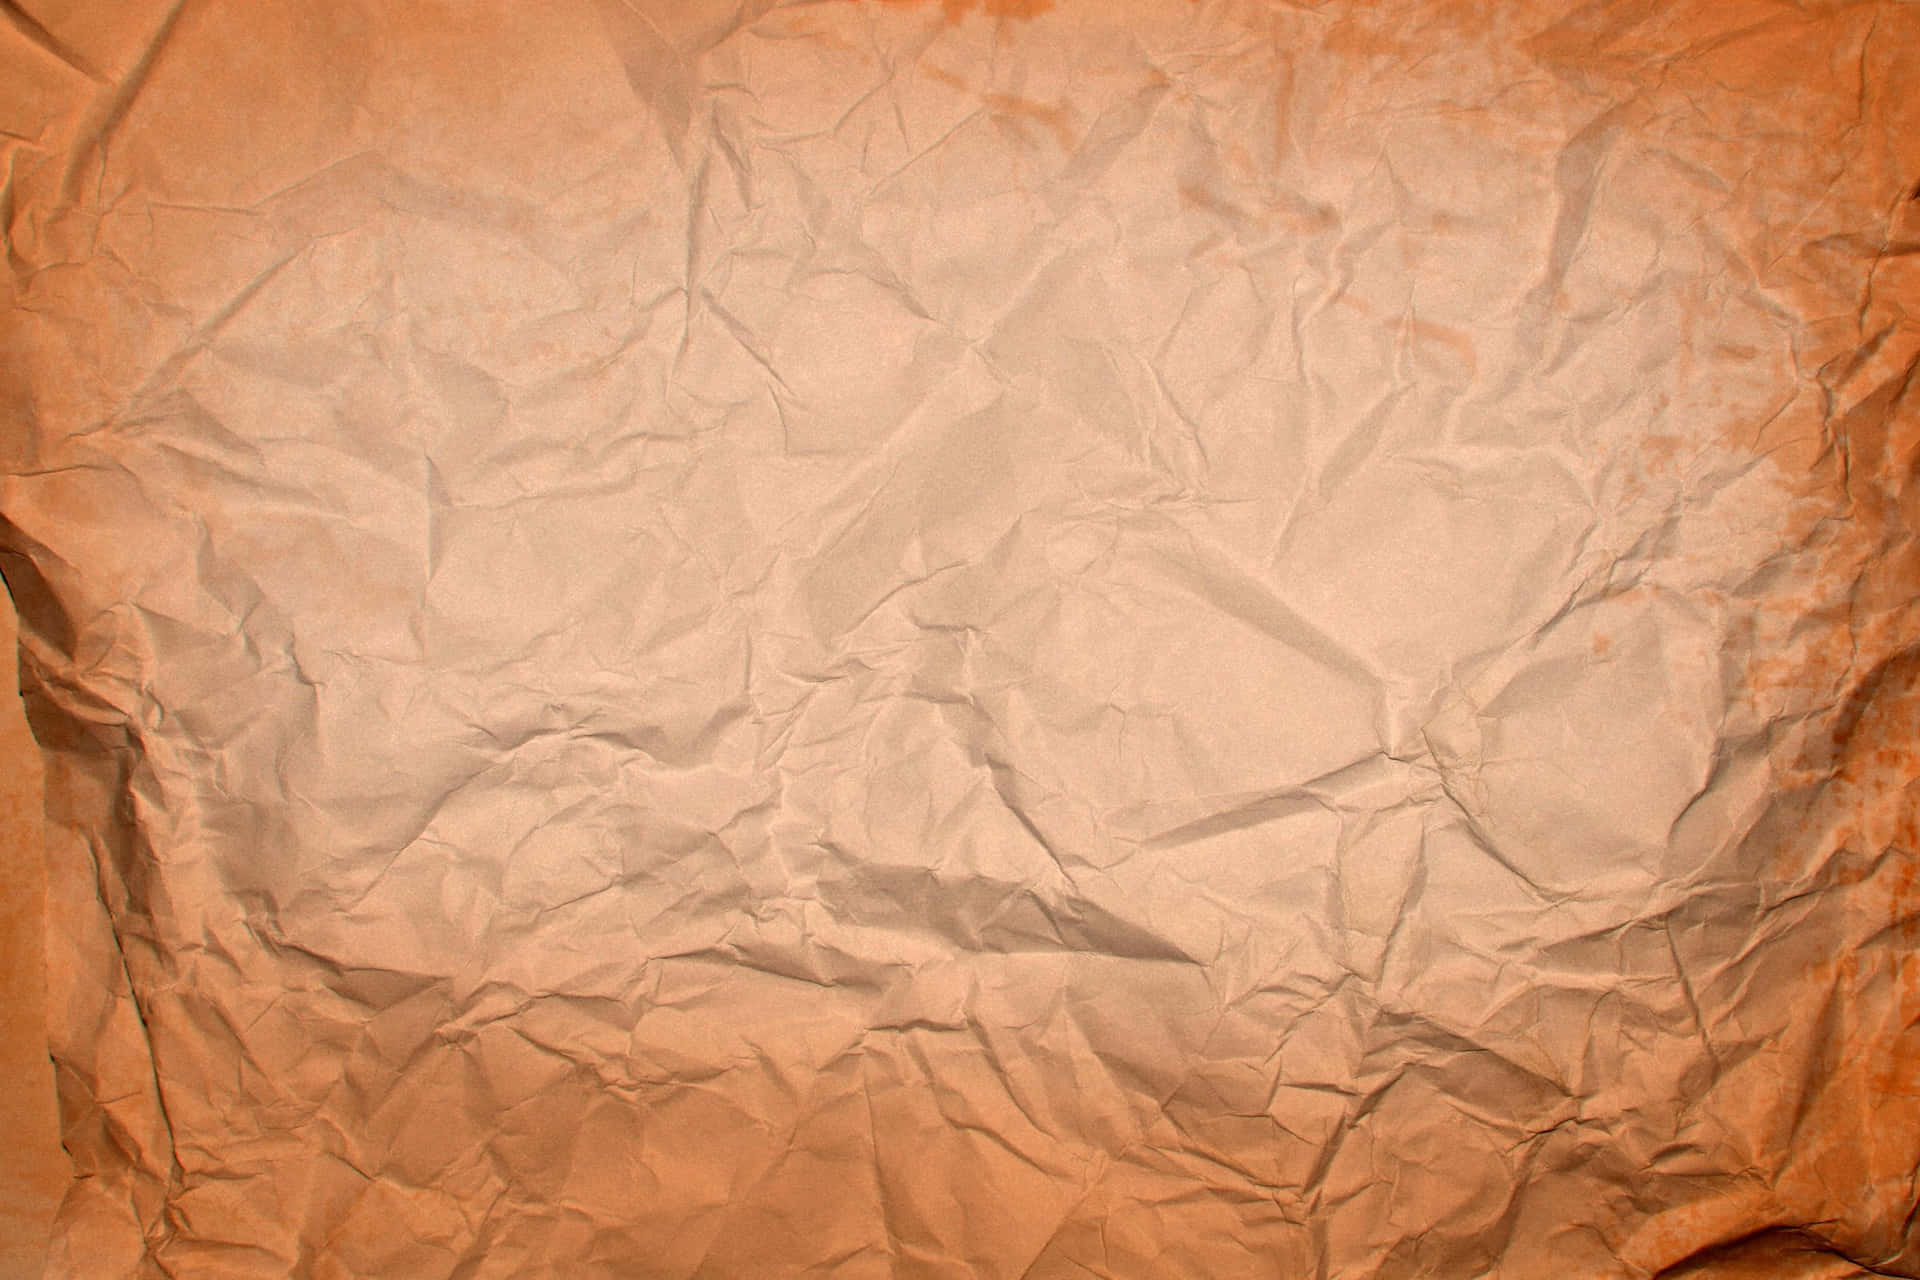 Old Vintage Paper Texture Aesthetic Abstract Of Ancient Backgrounds